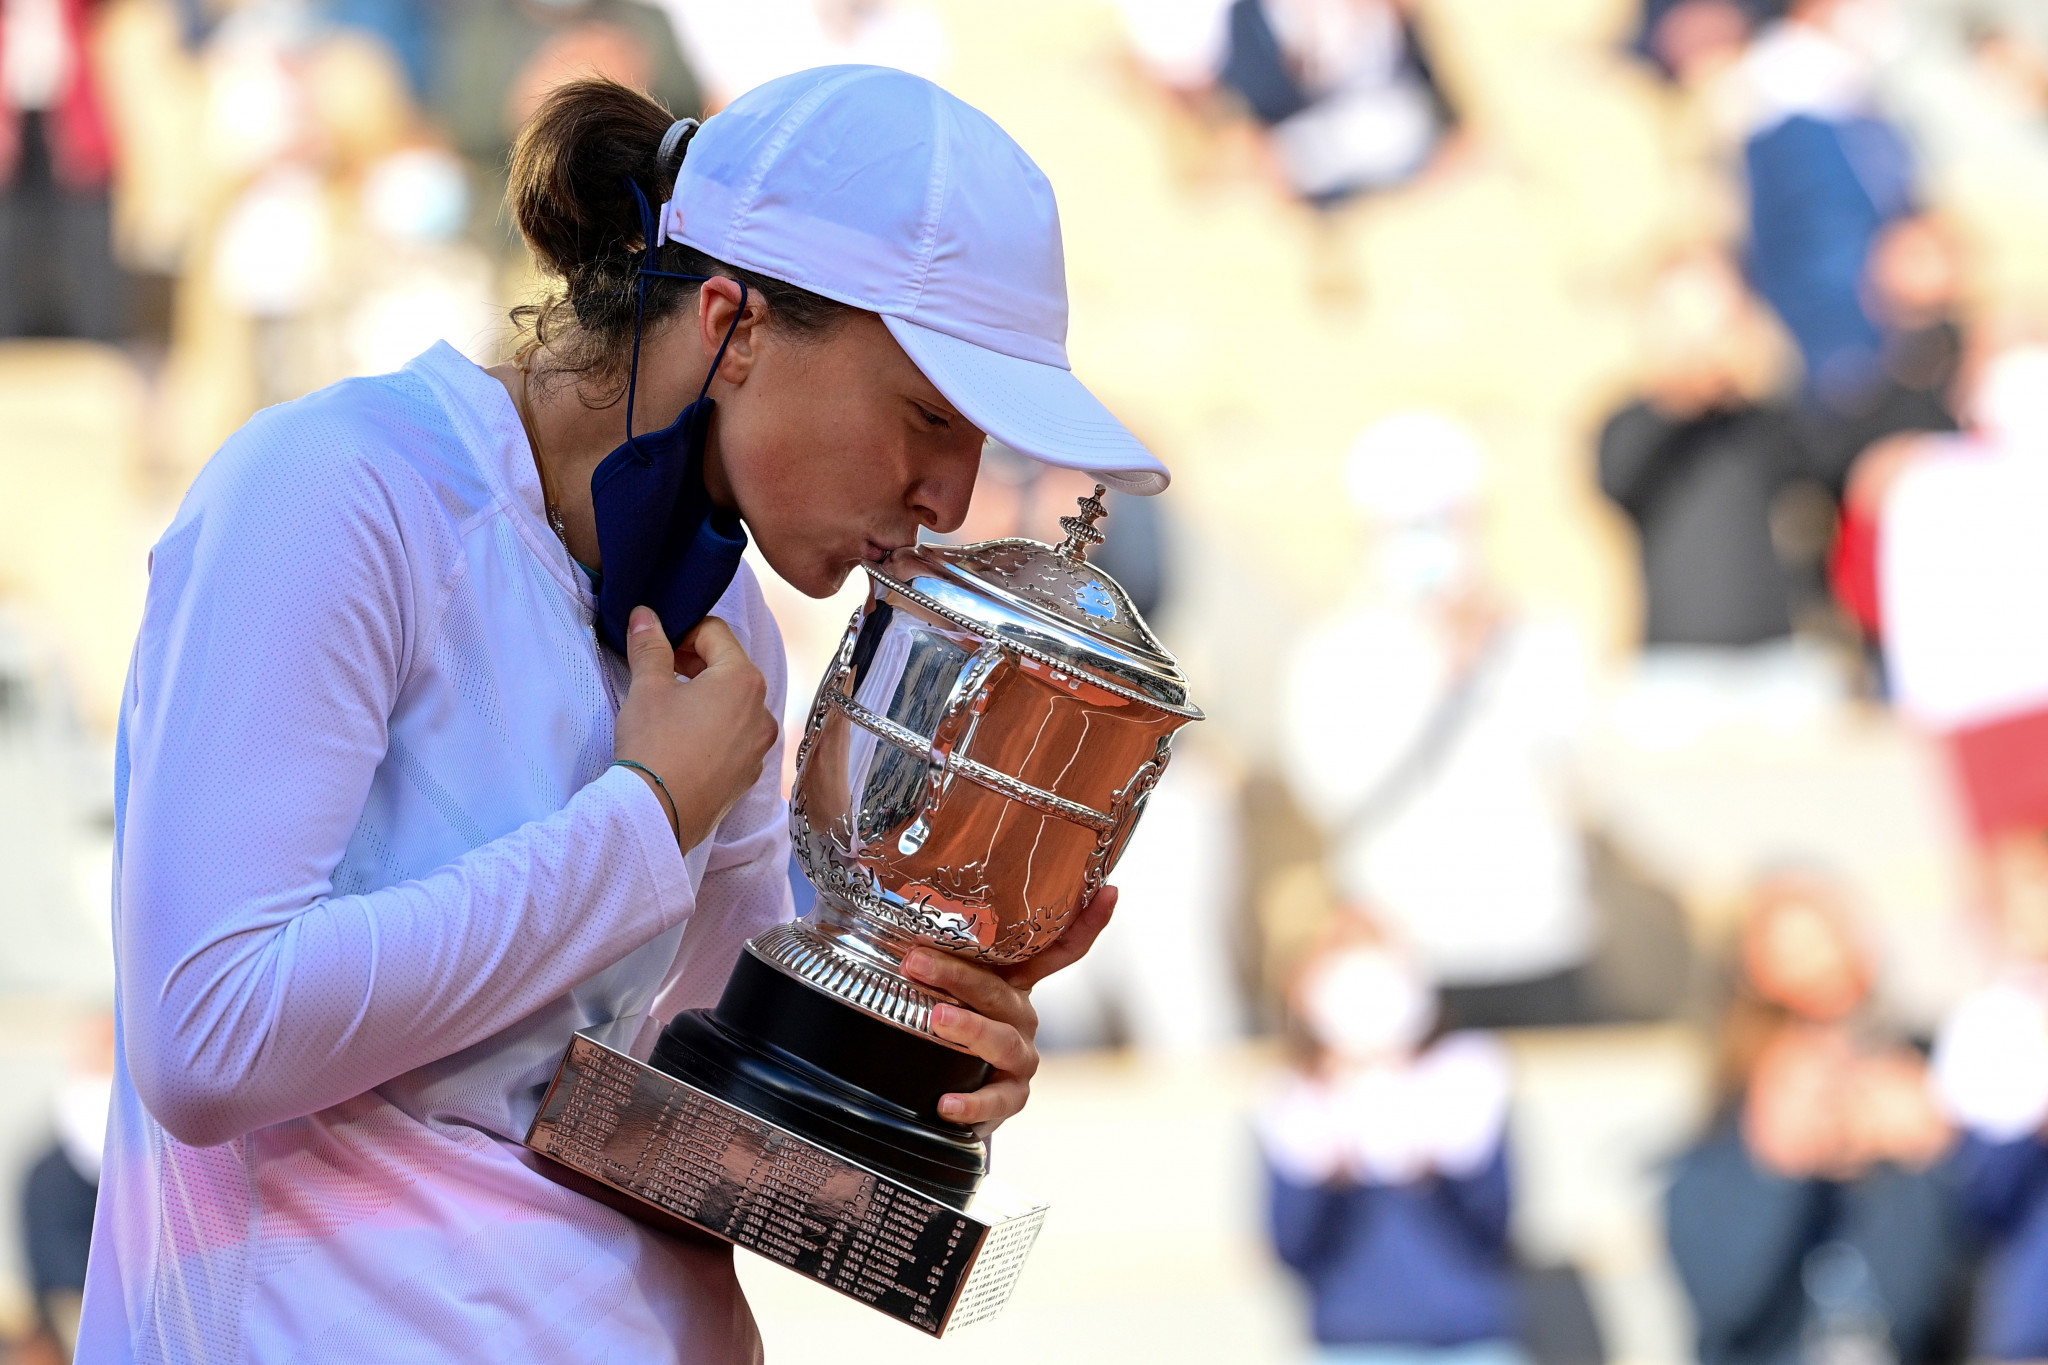 Iga Świątek removes her mask so she can kiss the Suzanne Lenglen Cup after winning the French Open ©Getty Images